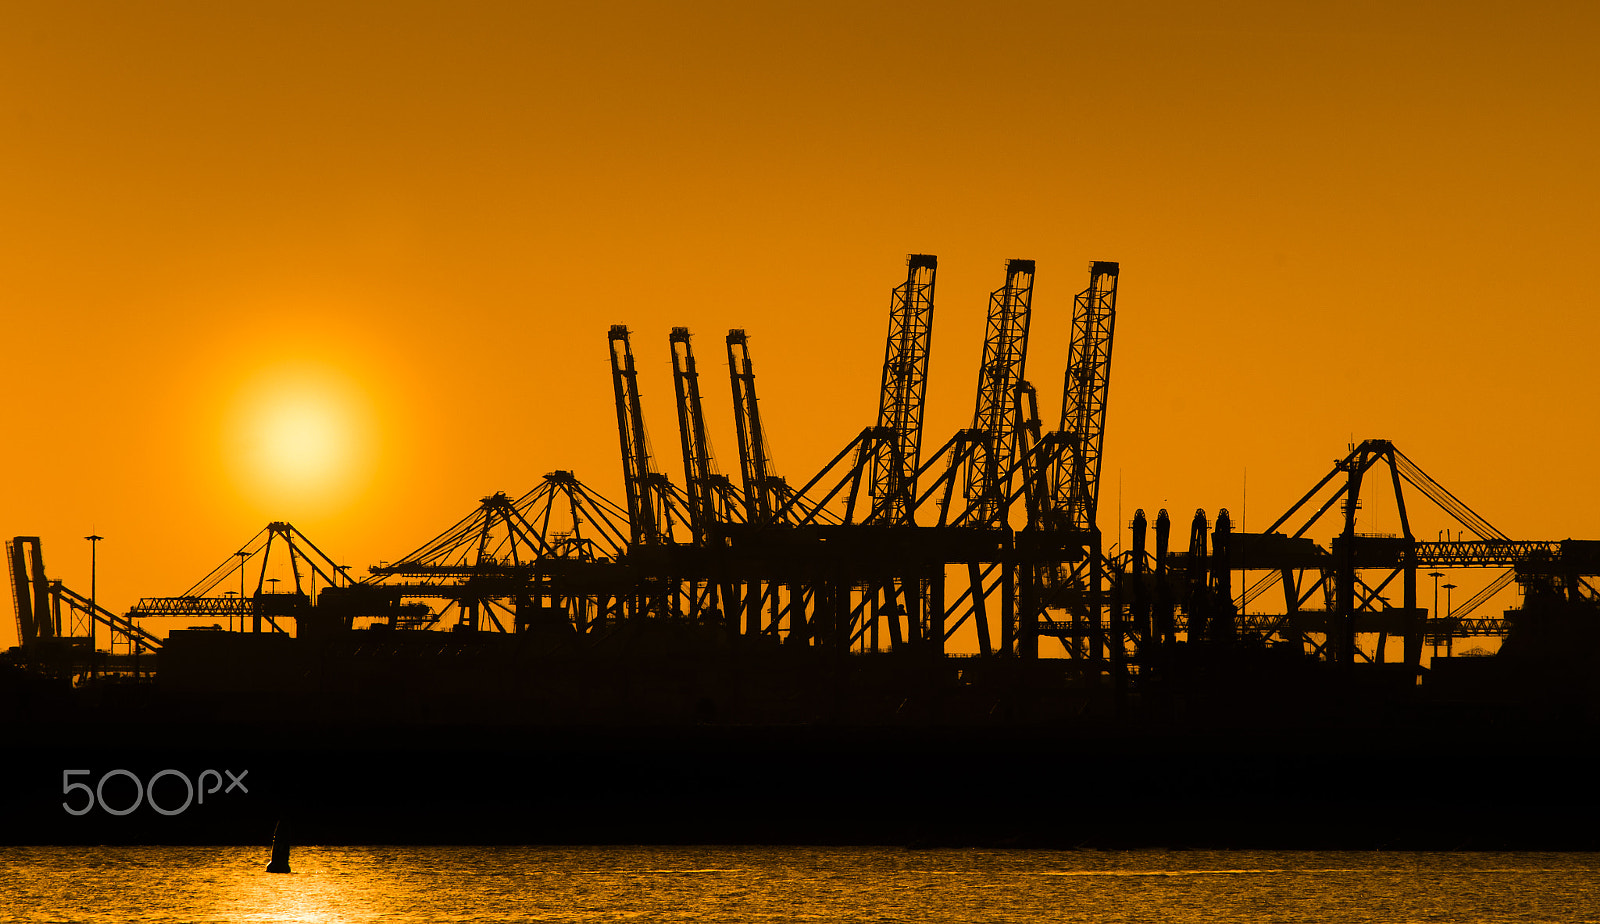 Sony Alpha DSLR-A850 + Sigma 150-500mm F5-6.3 DG OS HSM sample photo. Sunset at port of rotterdam photography